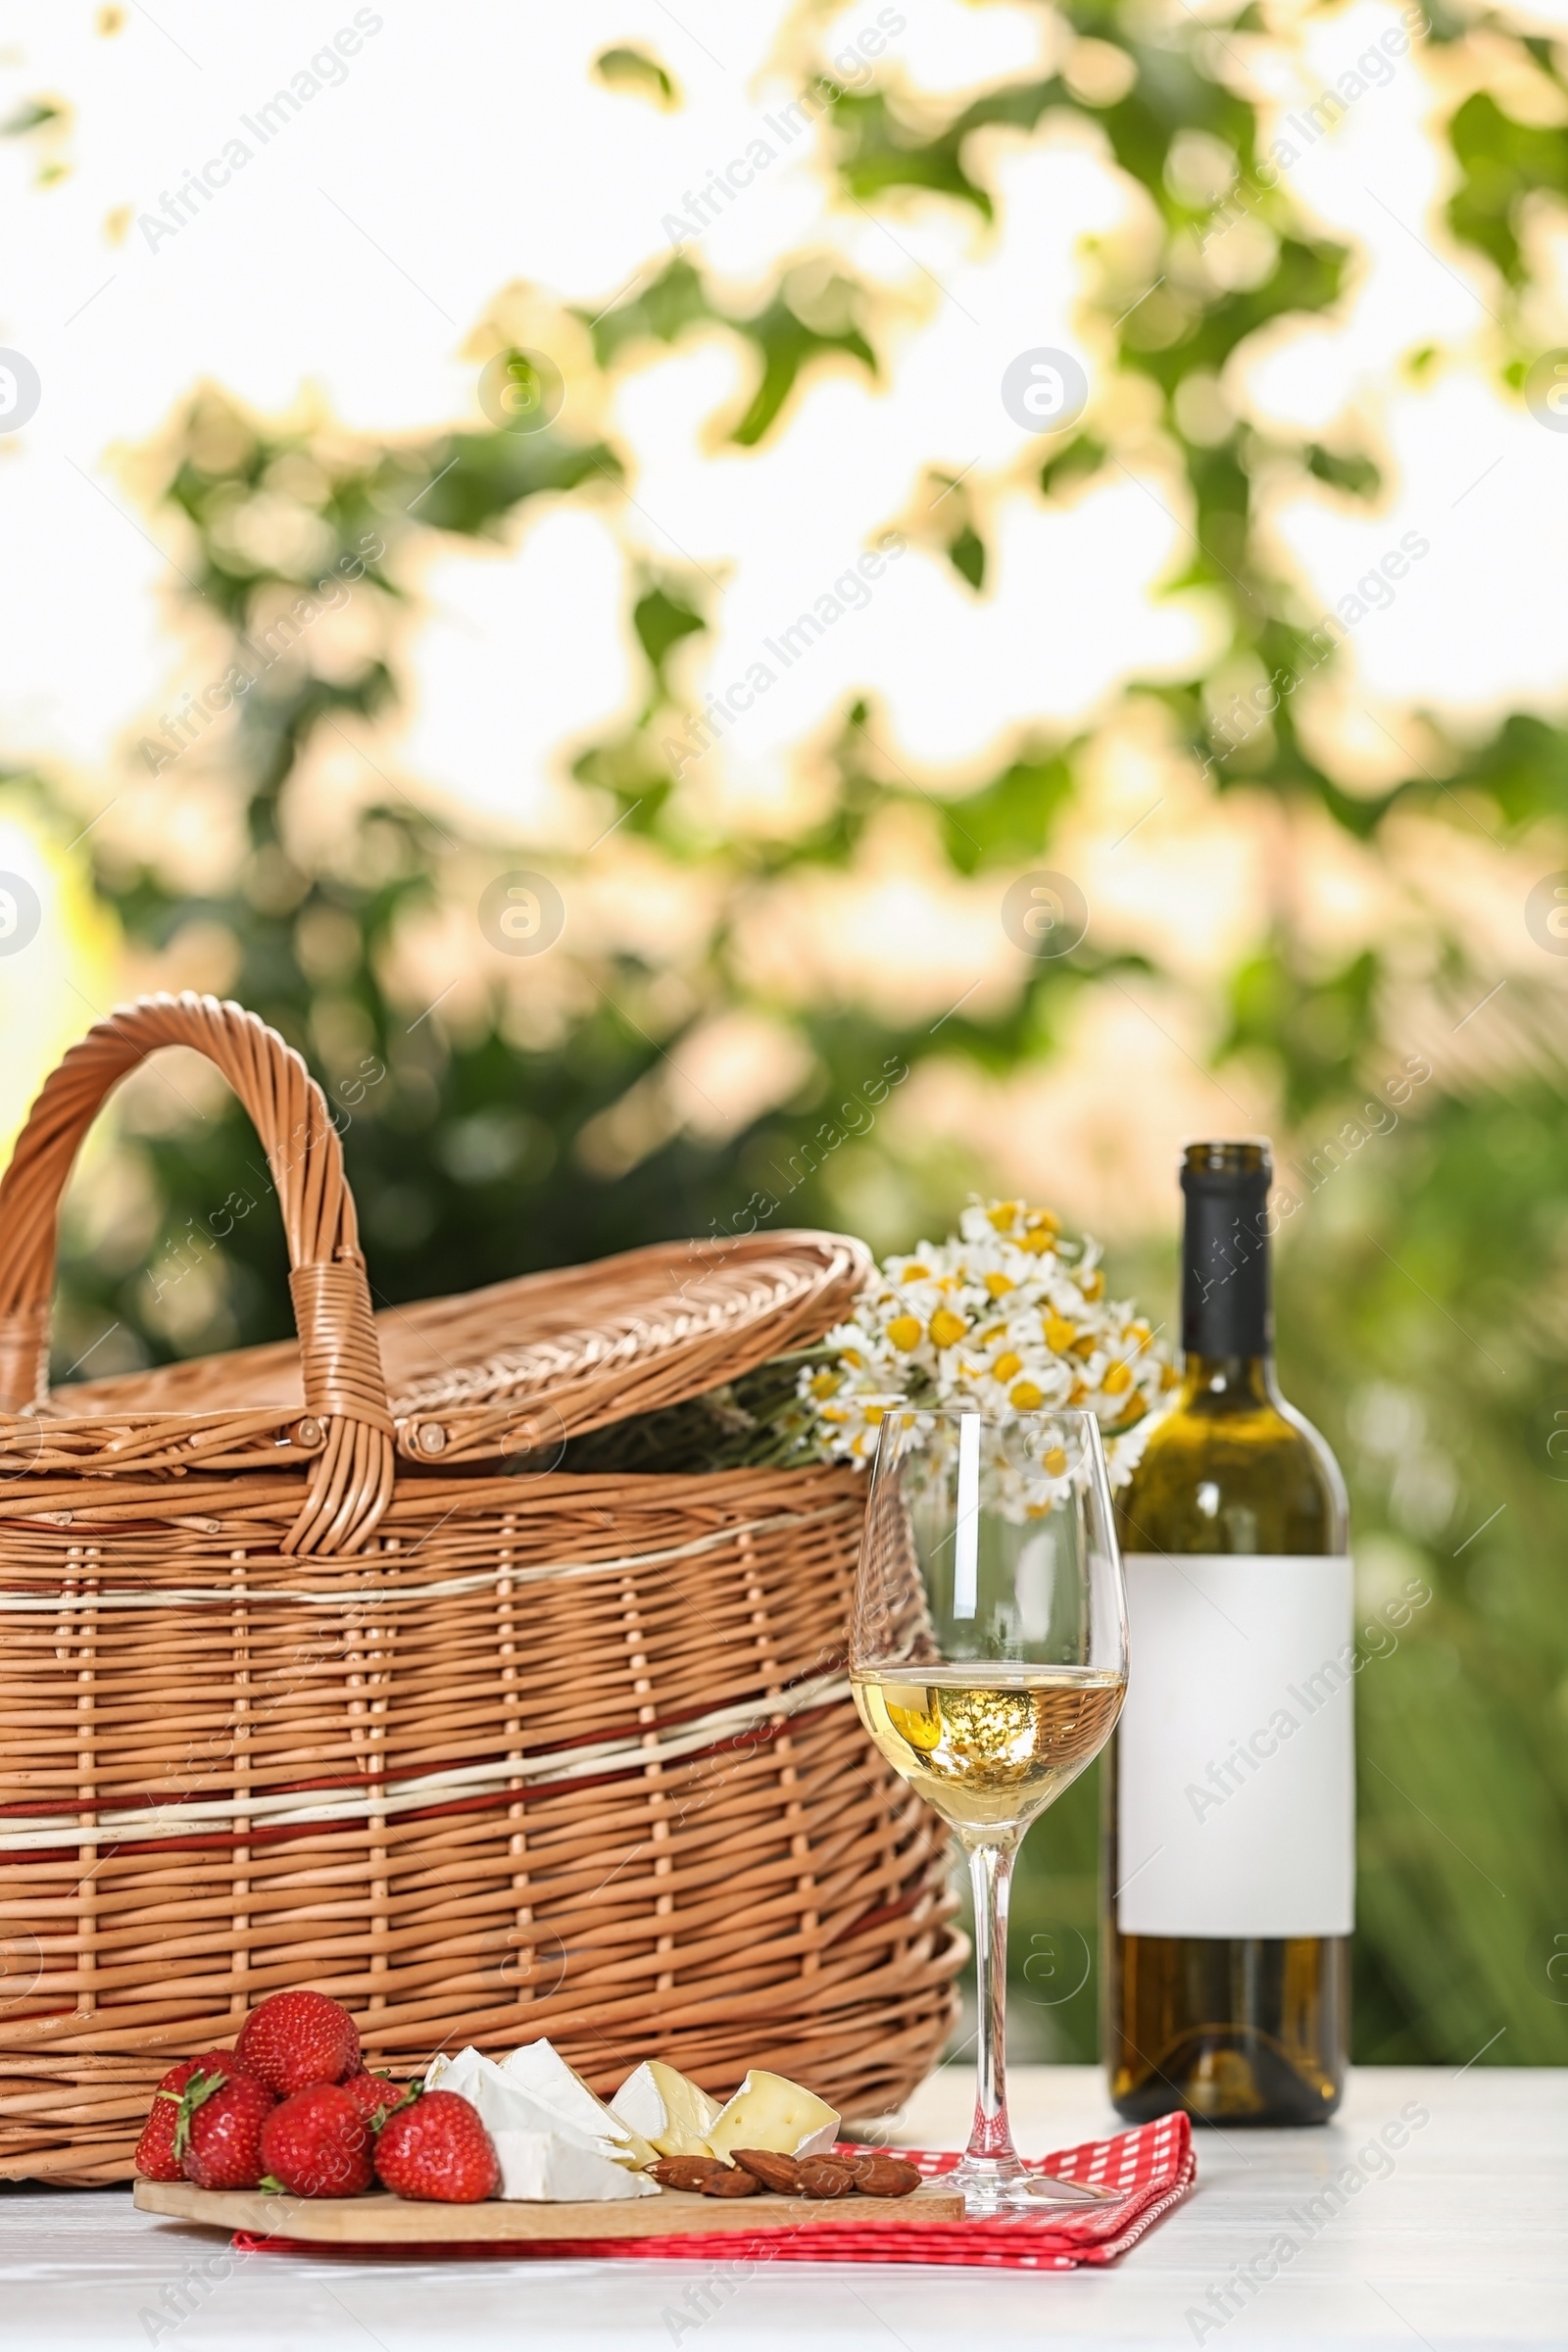 Photo of Picnic basket and wine with products on table against blurred background, space for text